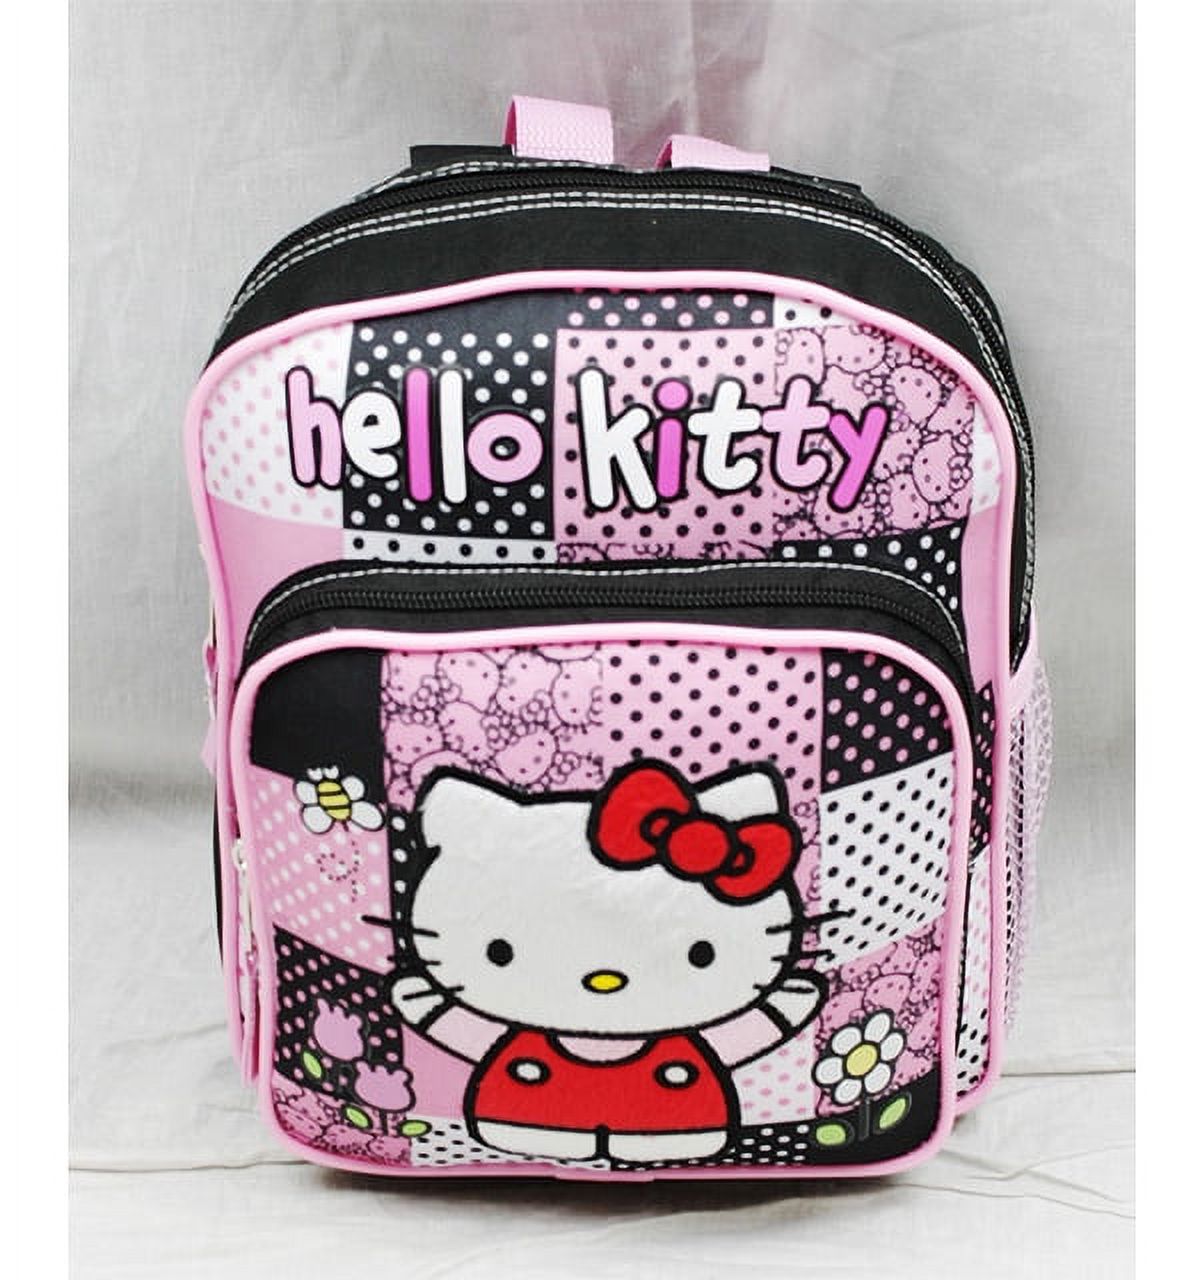 Mini Backpack - - Pink/Red Box New School Bag Book Girls 82513 - image 1 of 3